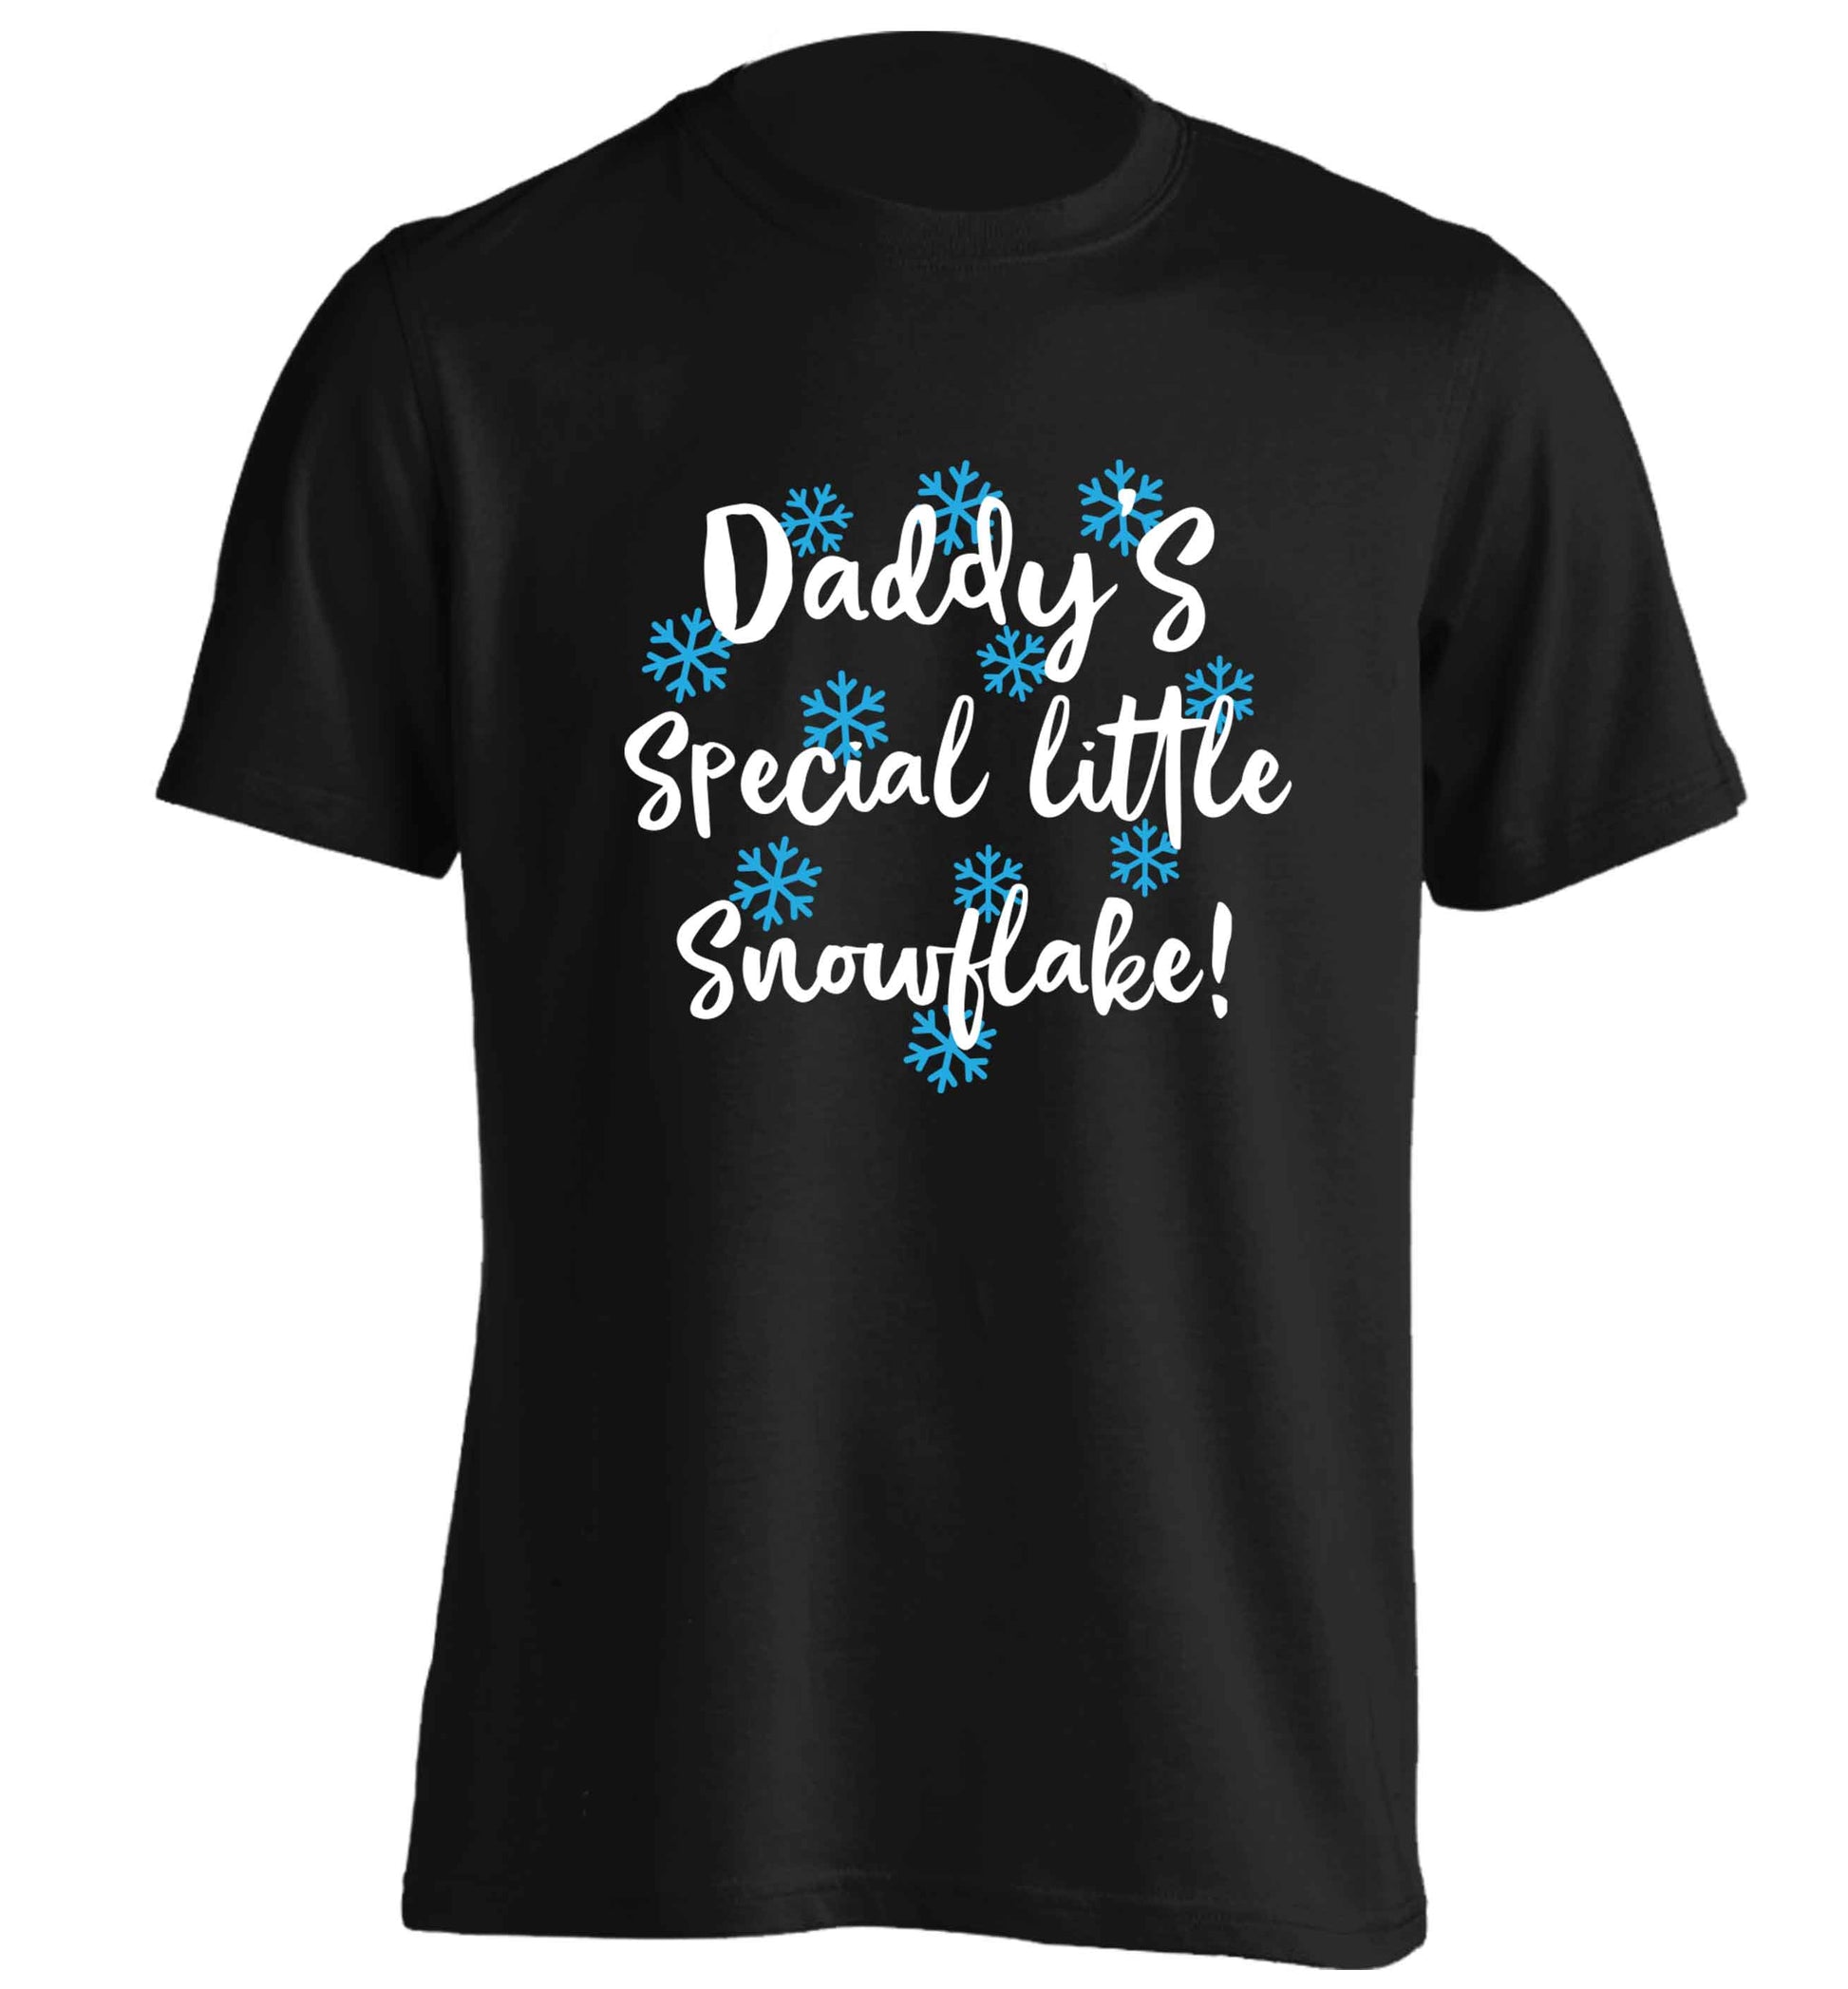 Daddy's special little snowflake adults unisex black Tshirt 2XL